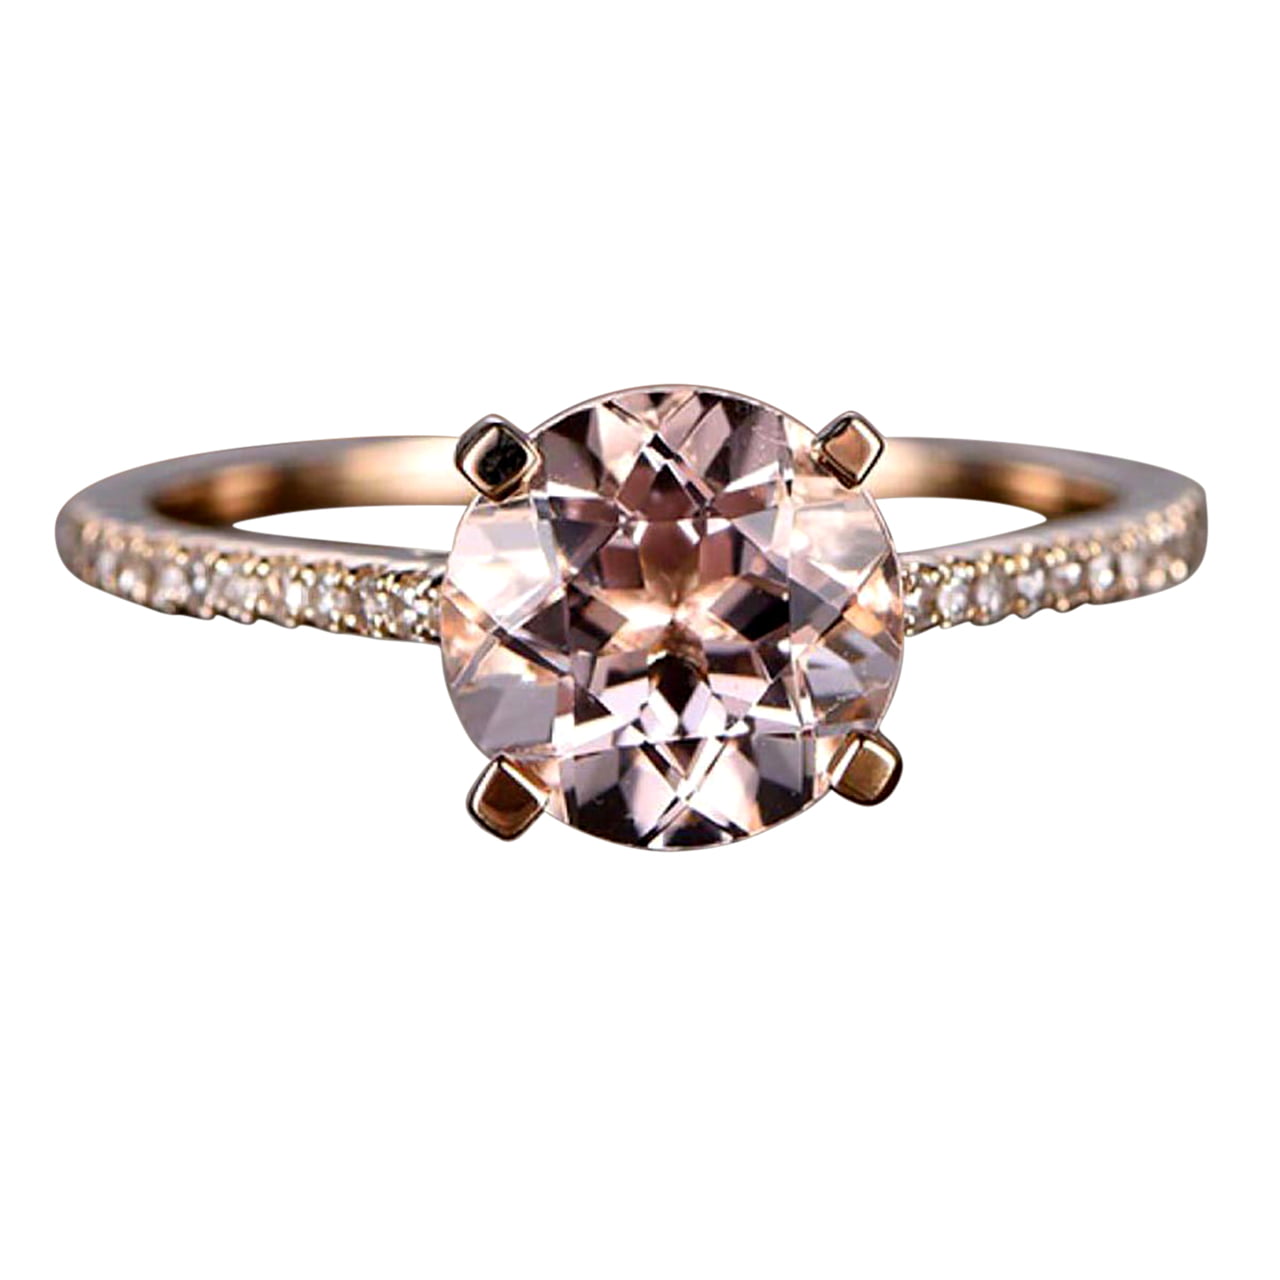 Limited Time Sale 1.25 carat Morganite and Diamond Engagement Ring for Women with 18k Gold Plating 